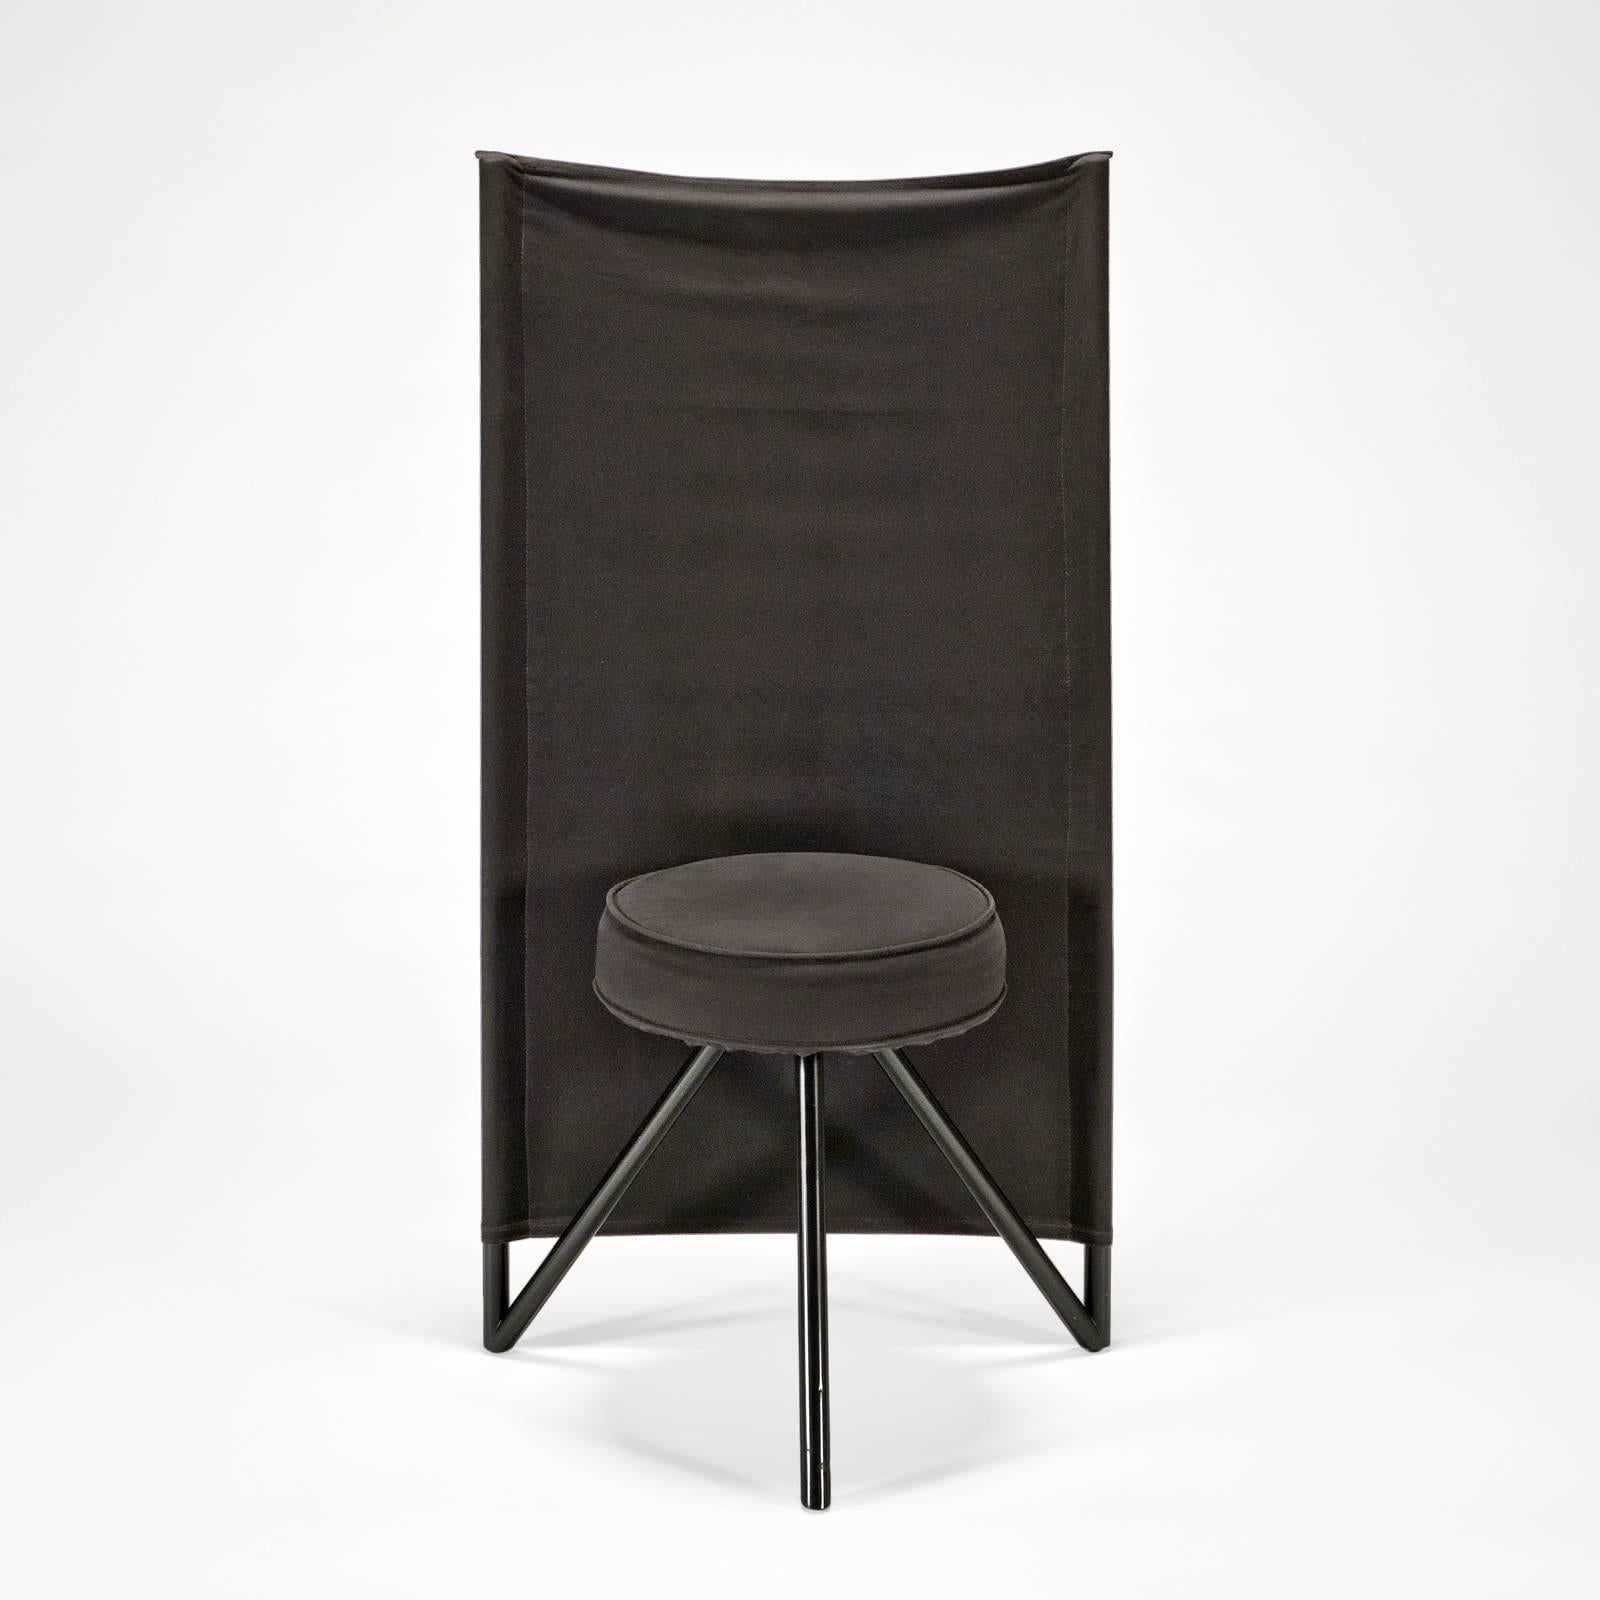 From 1982-1983 production. Black cotton canvas fabric is stretched over two vertical steel tubes and the tension creates the comfortable back of the chair. The seat has a matching cotton canvas cover cinched under the seat with black cotton ties.